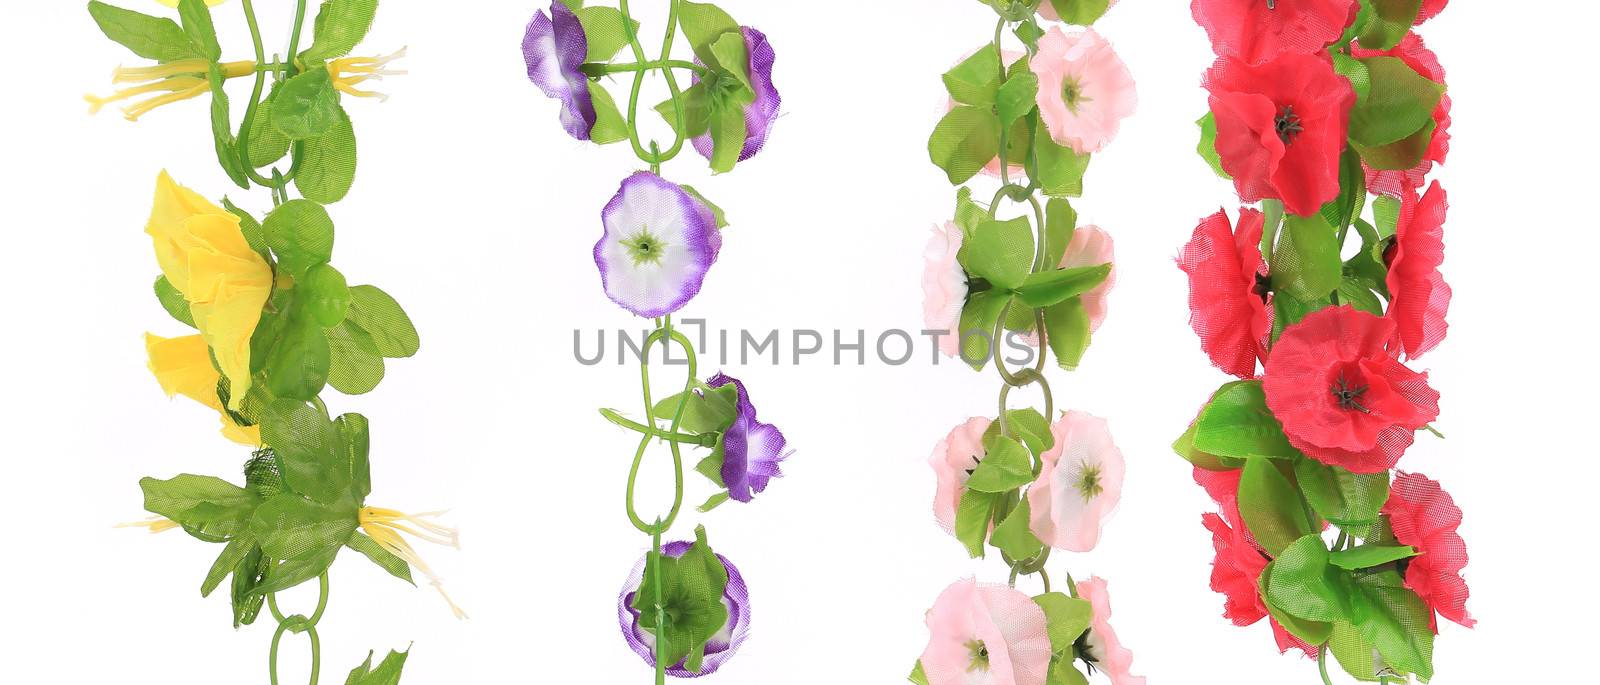 Top view of artificial flowers bunch isolated on white background.